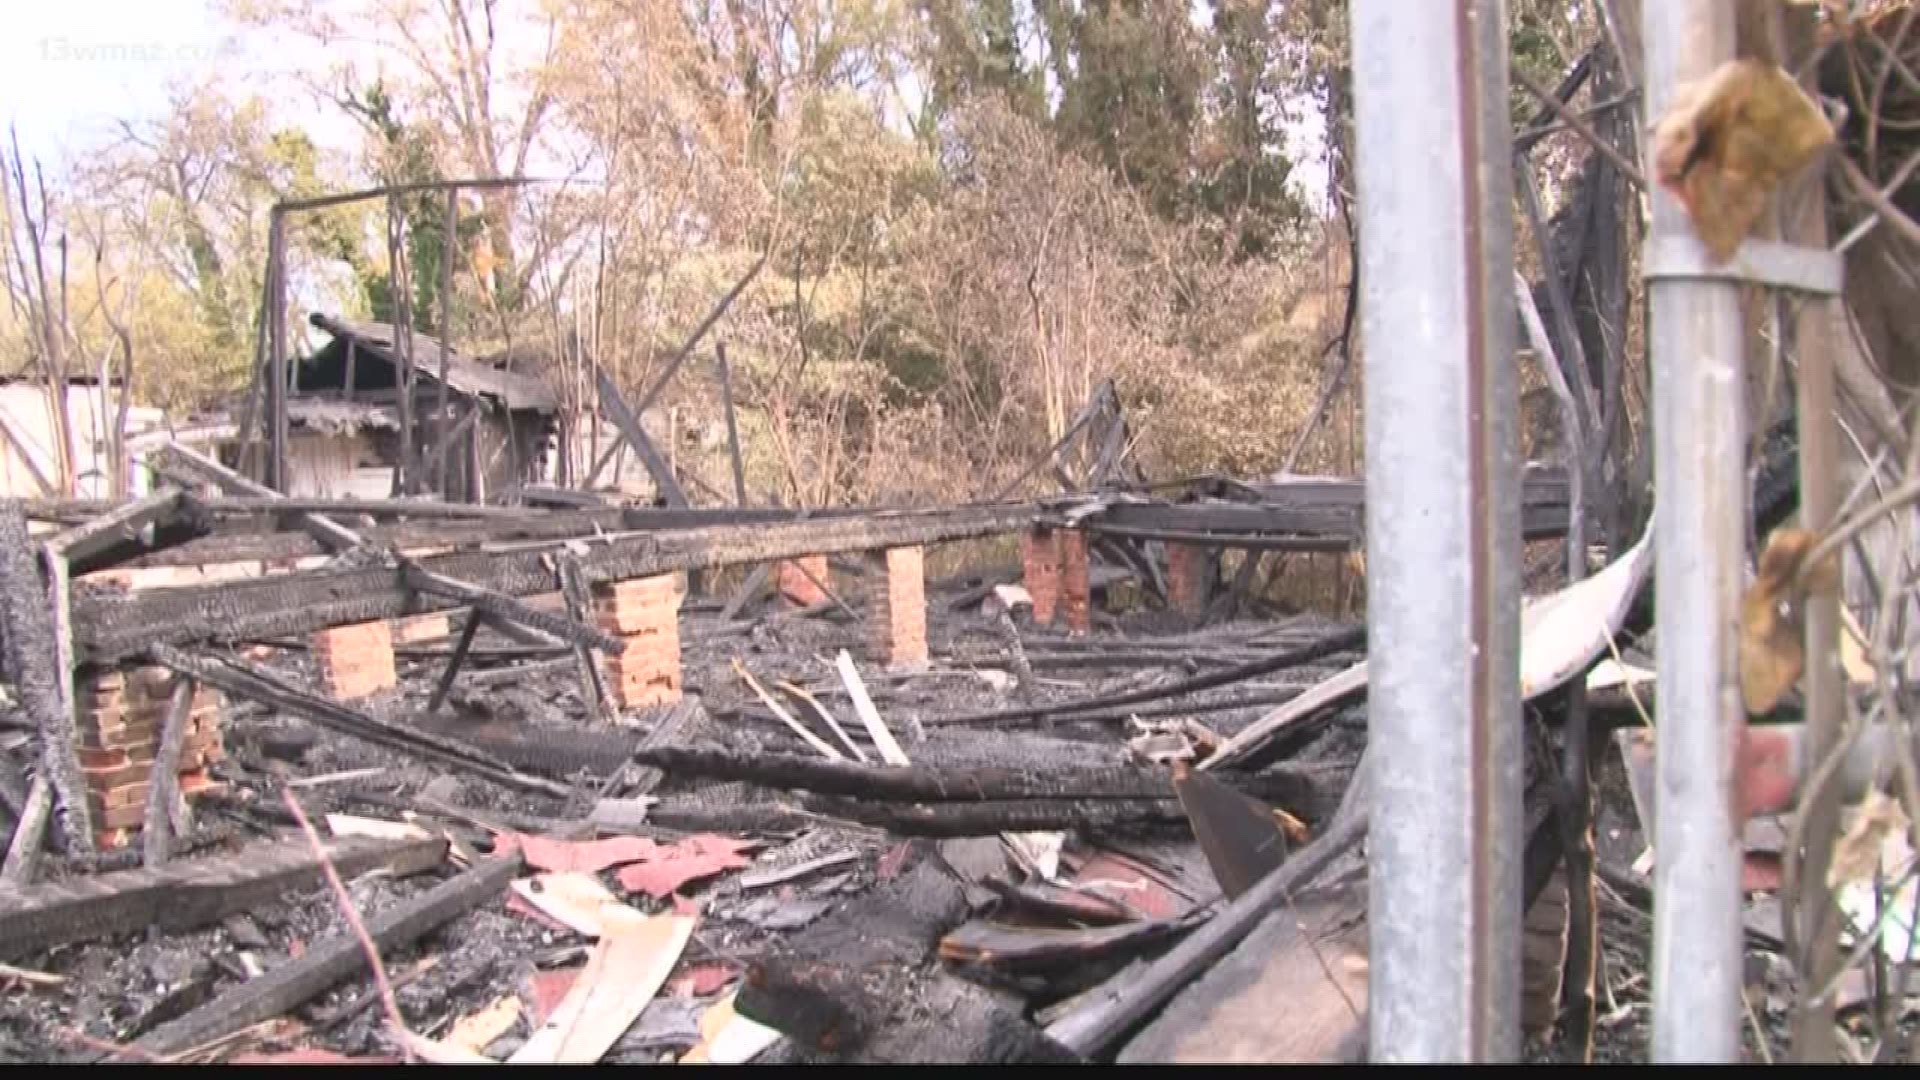 What was once considered a prominent church in the Pleasant Hill community is now burned to the ground, and the Macon-Bibb Fire Department is investigating.